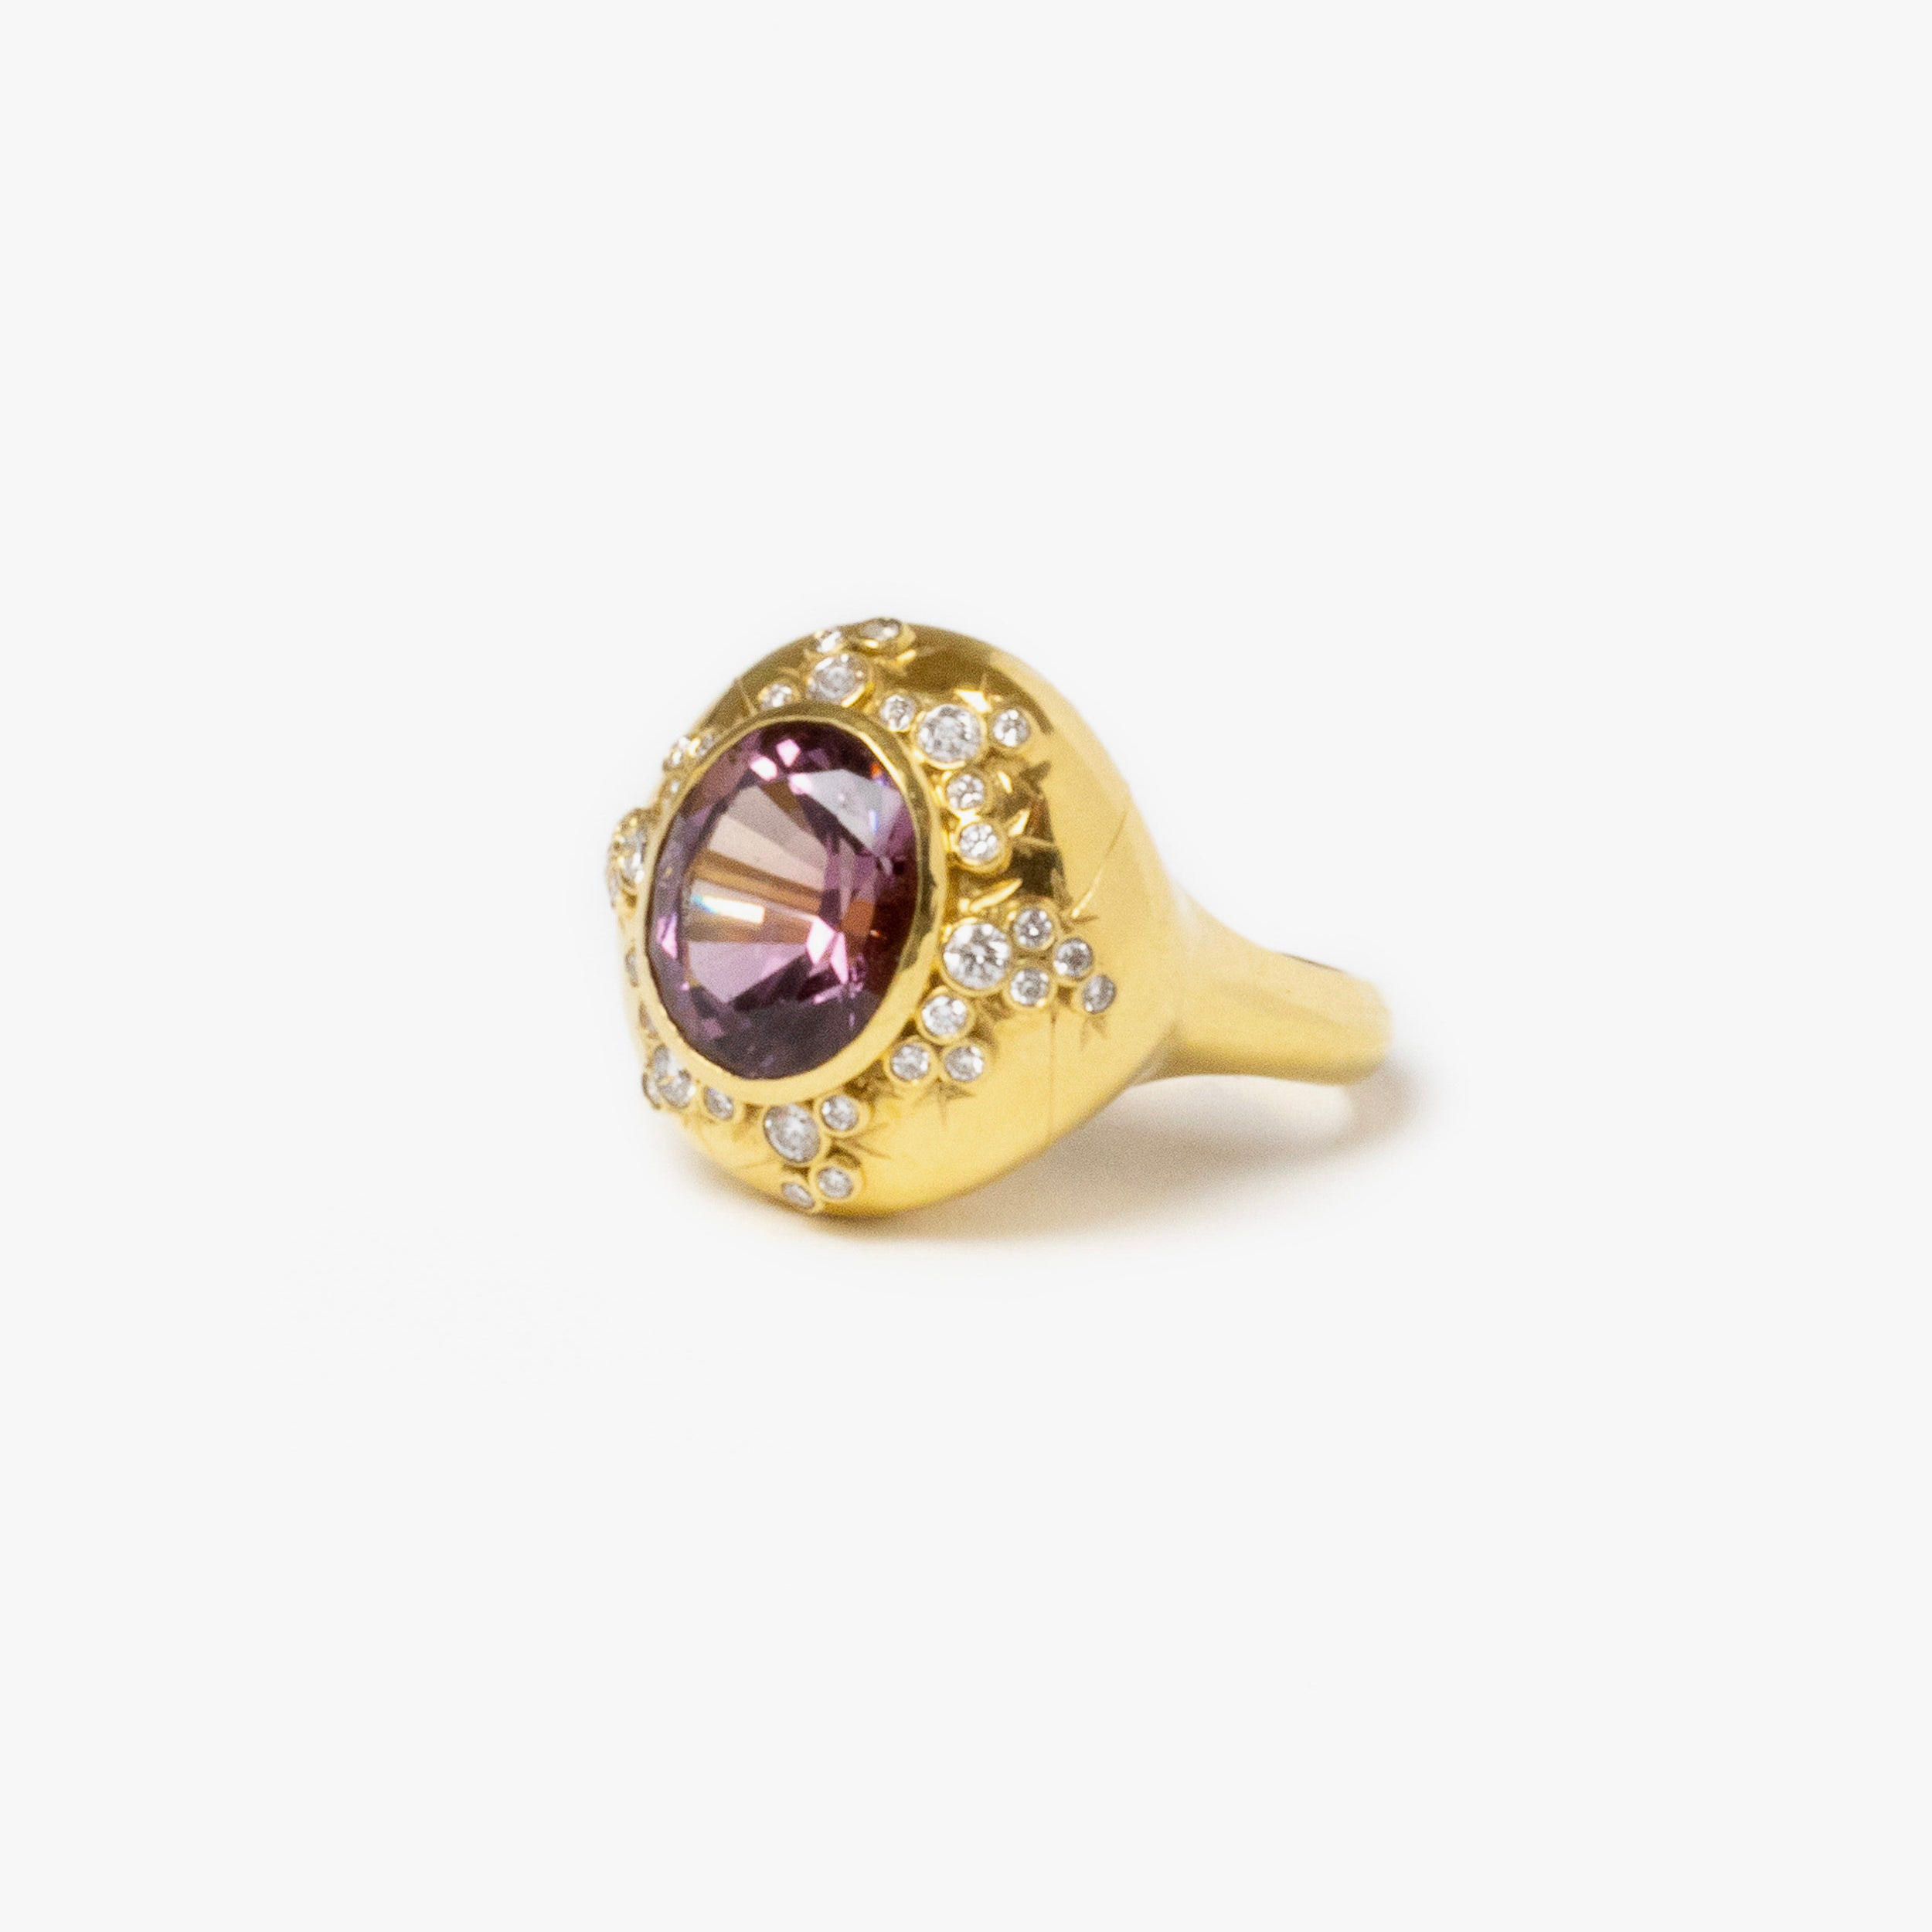 Constellation Ring with Mauve Spinel